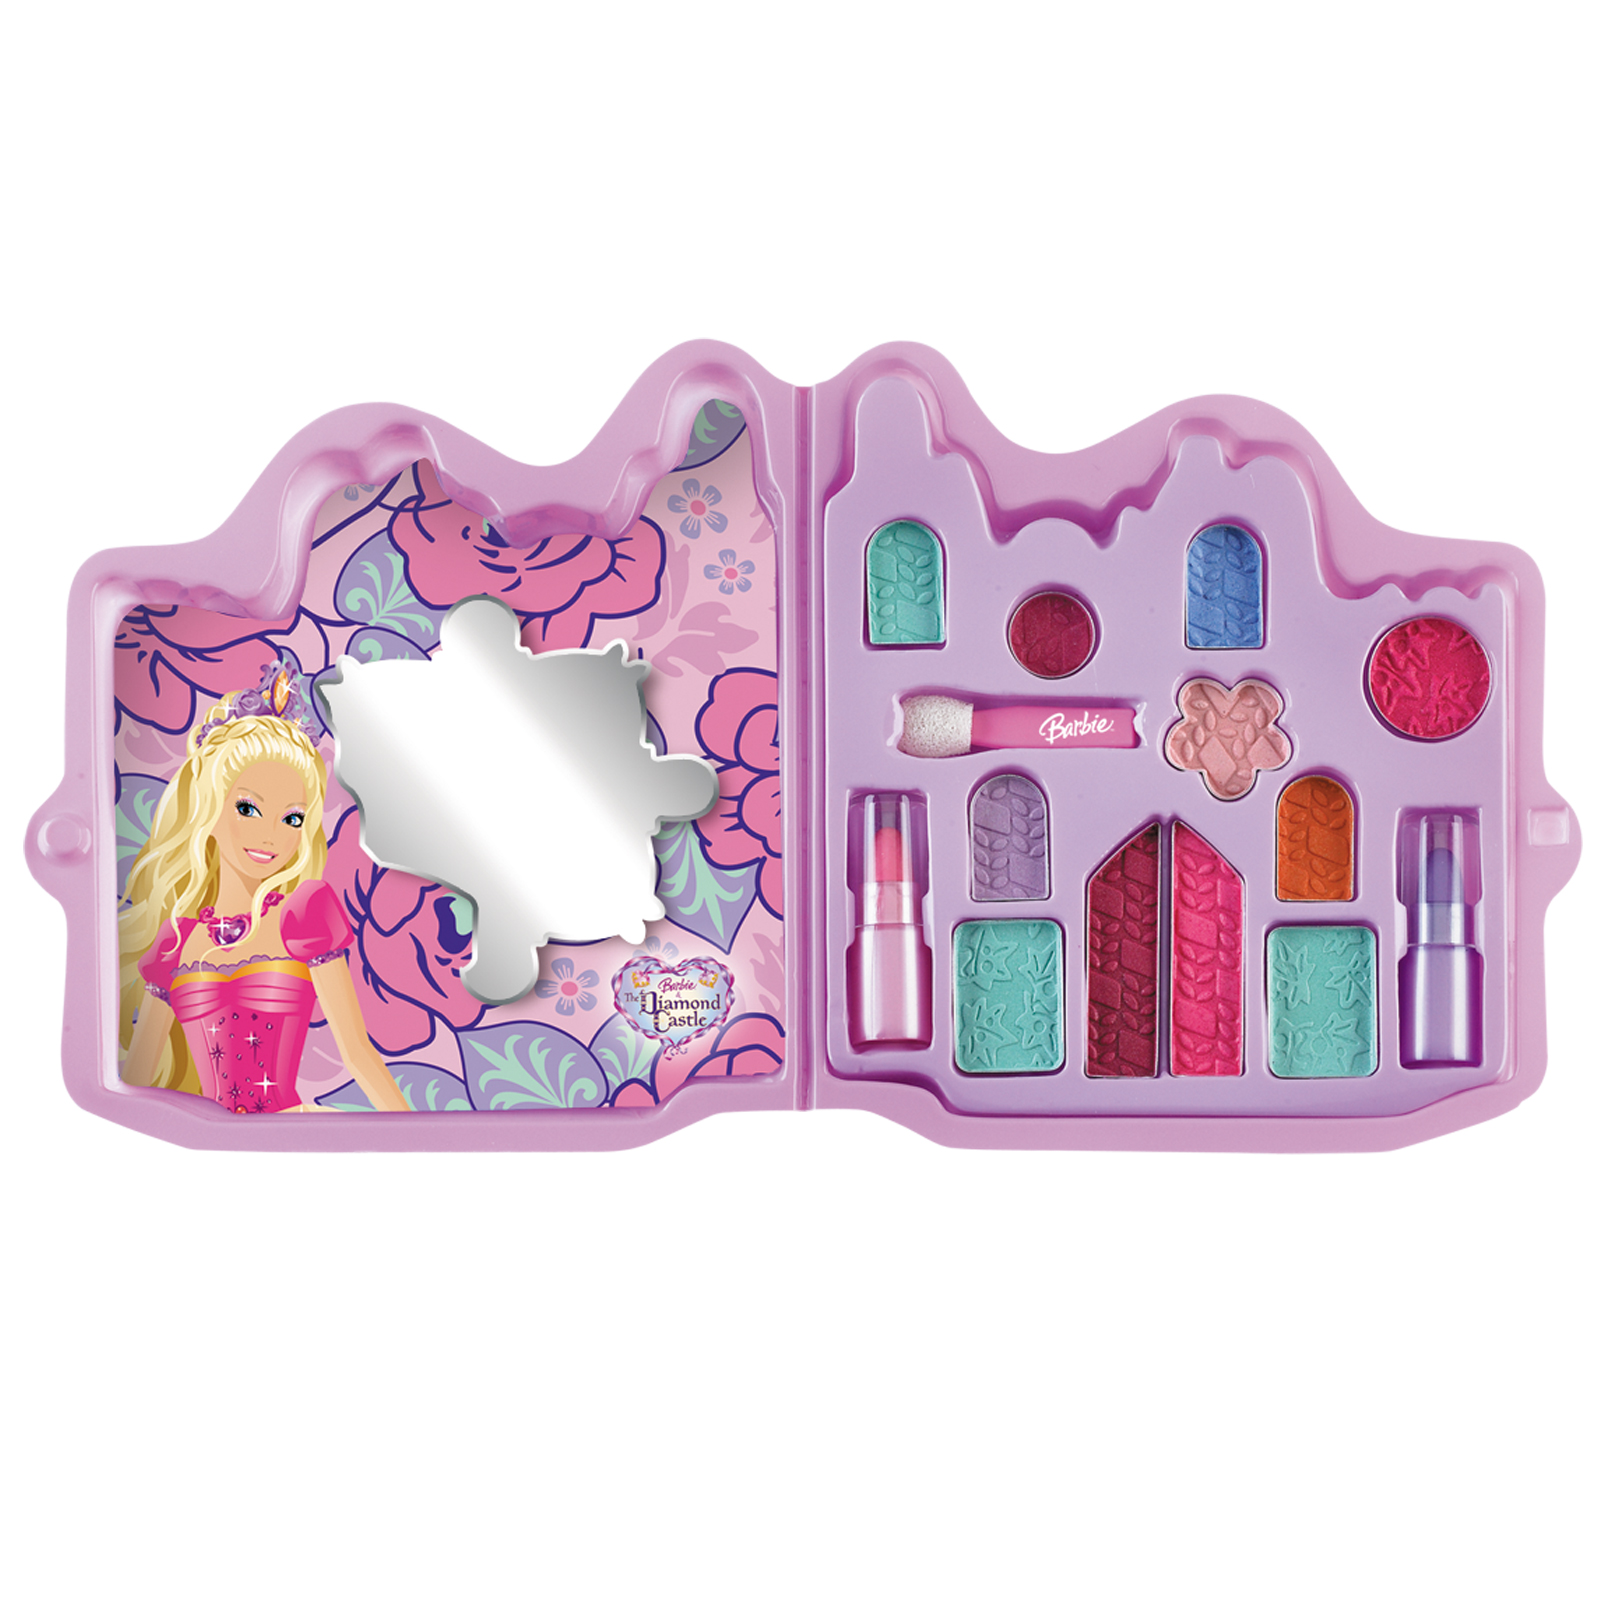 Disguise Inc Women's Barbie & Diamond Castle Compact with Mirror